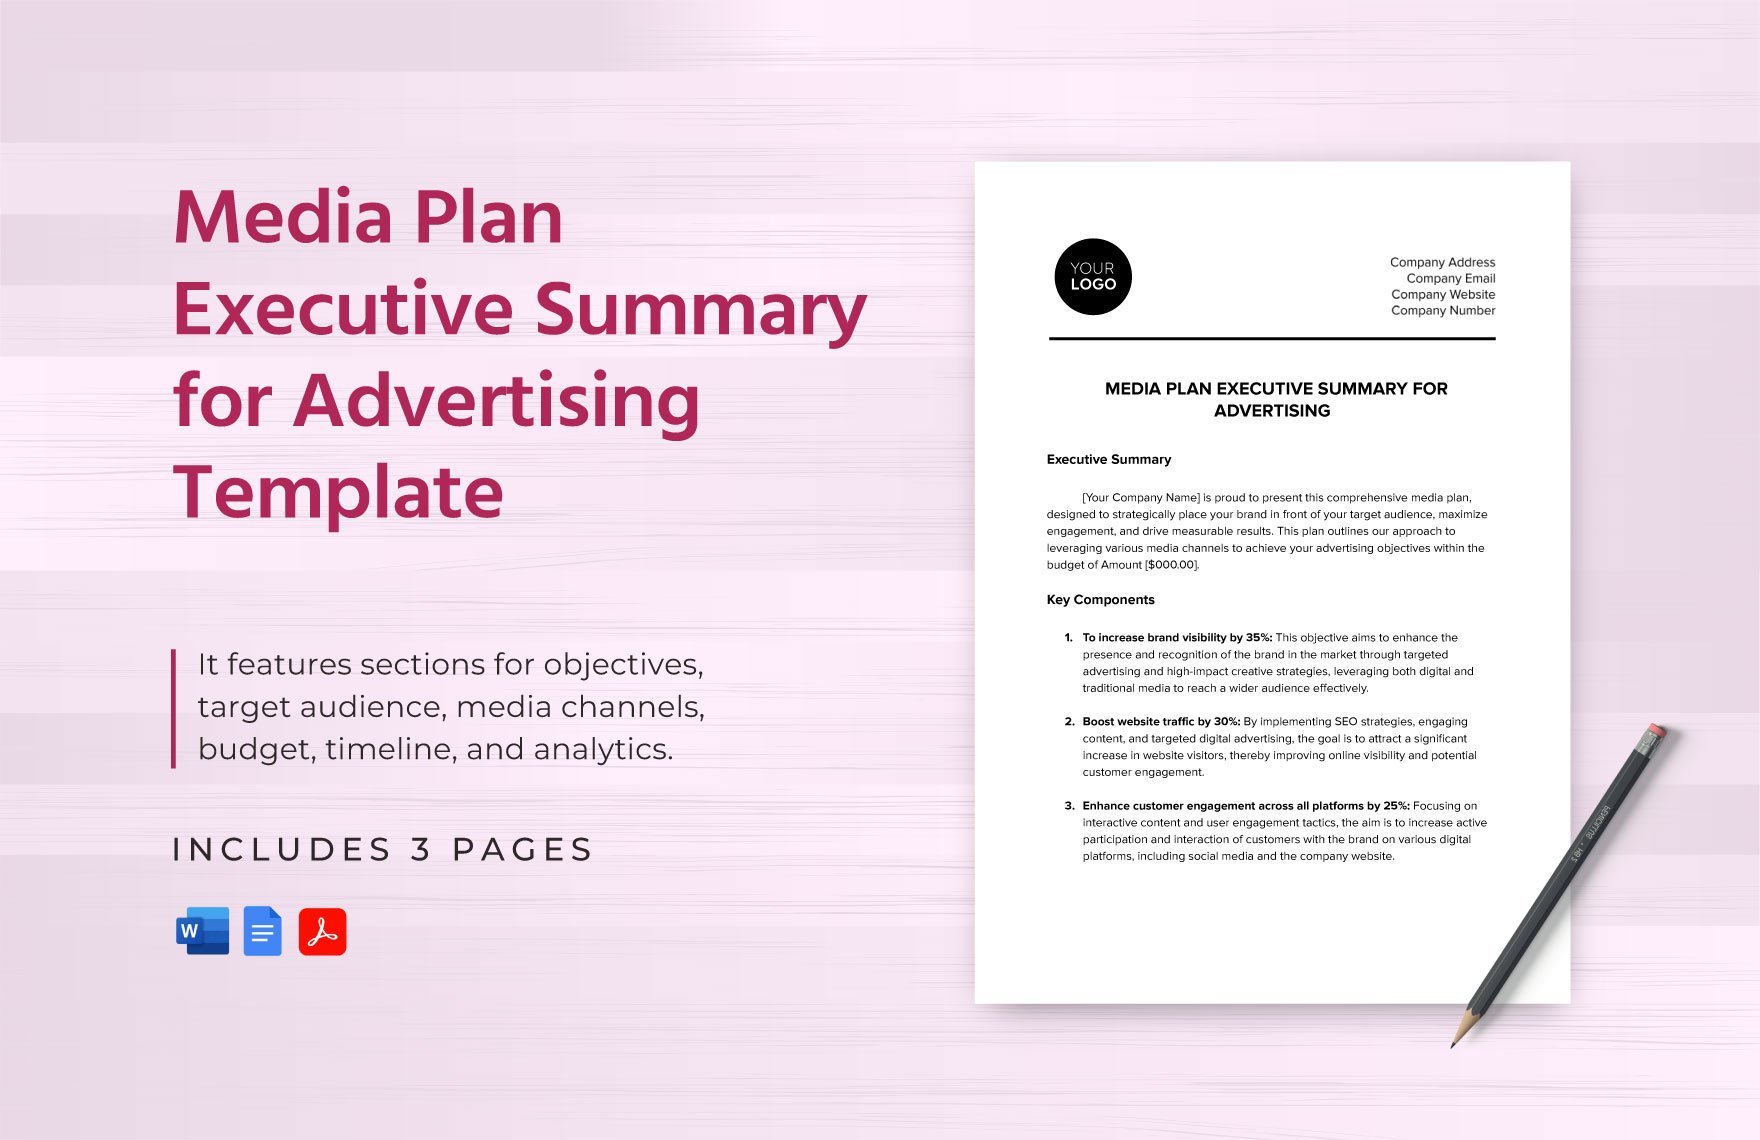 Media Plan Executive Summary for Advertising Template